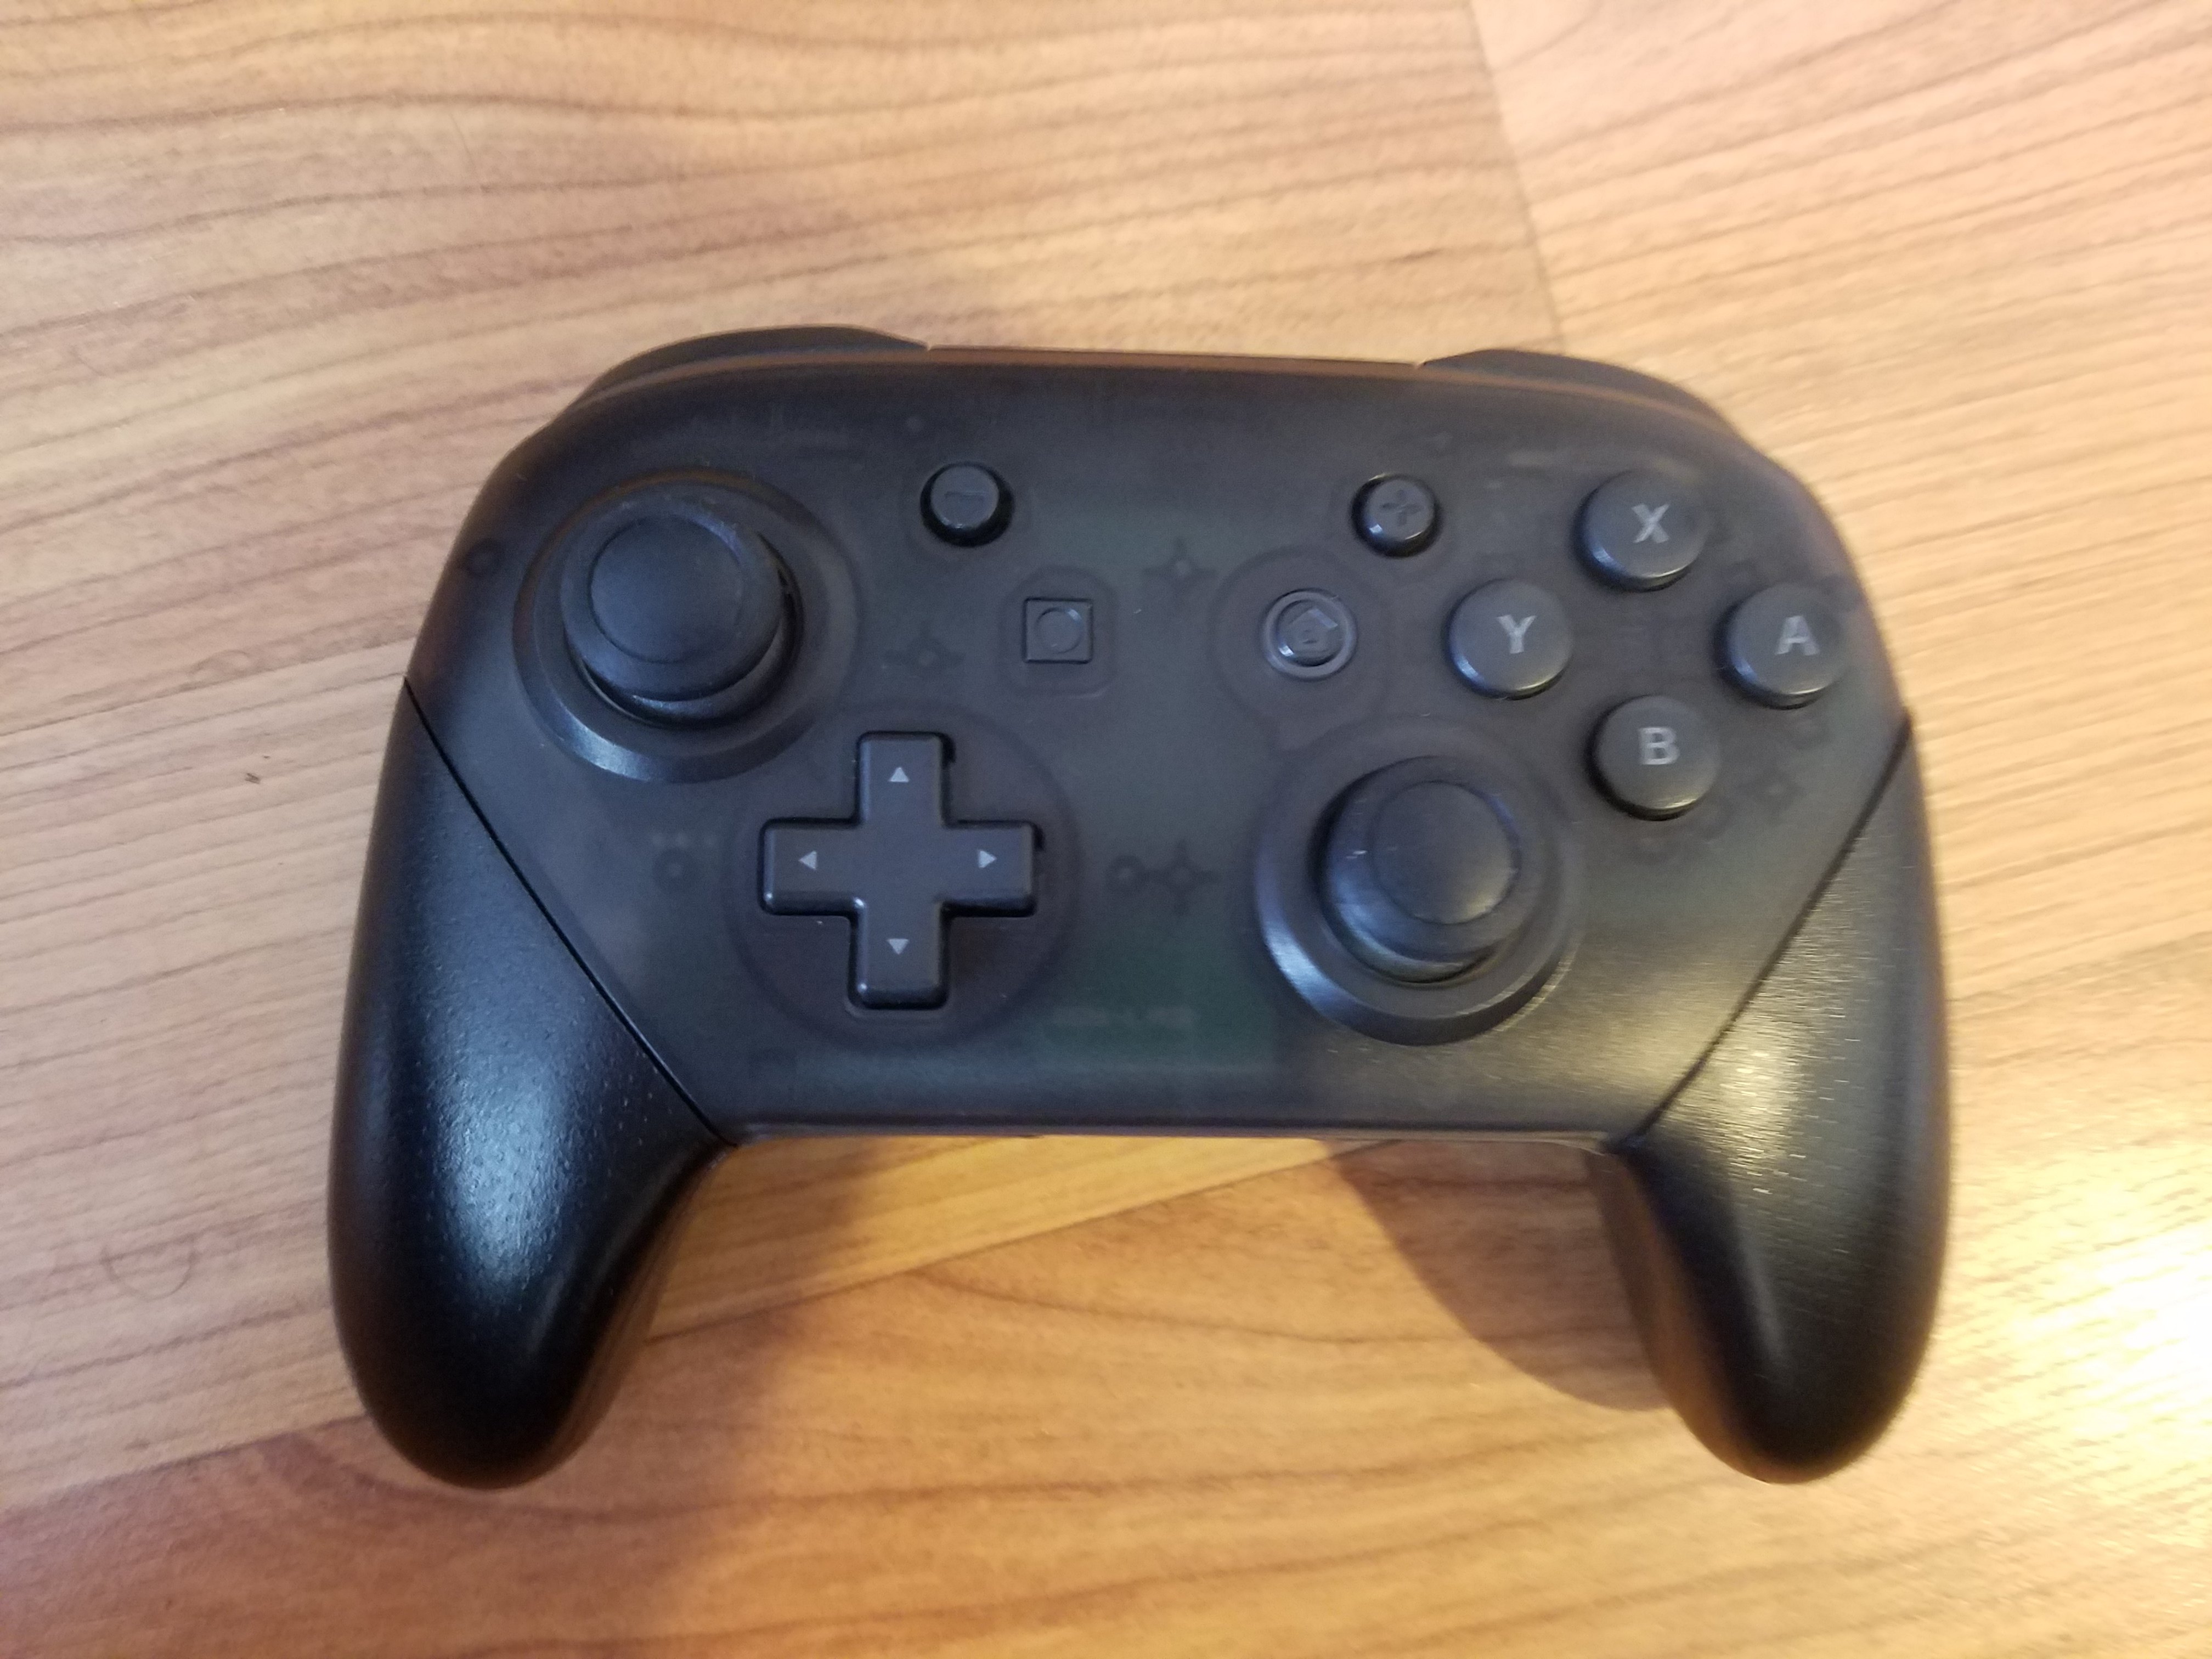 Fake Pro controller | GBAtemp.net - The Independent Video Game Community